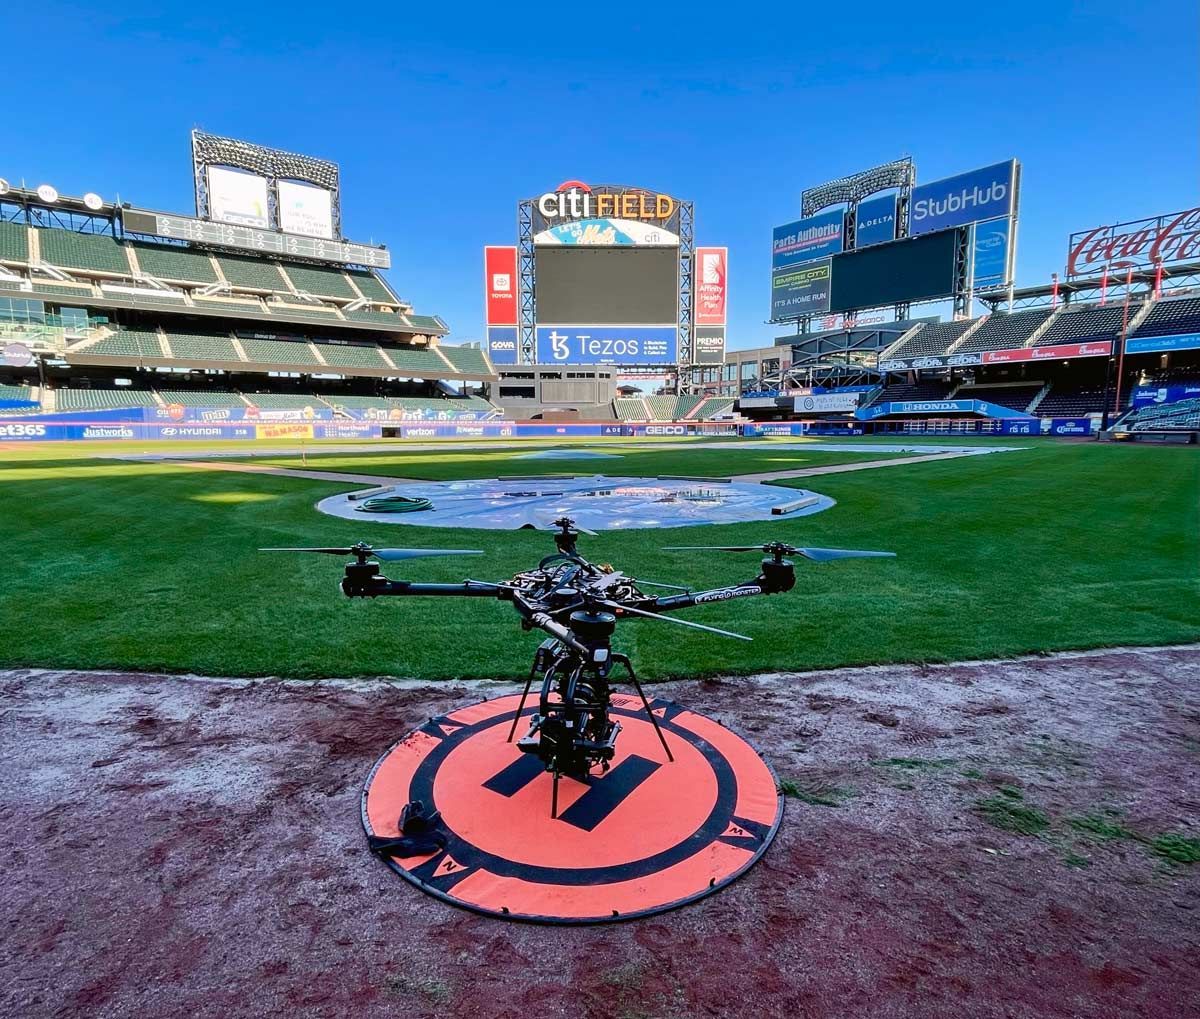 A drone is sitting on a landing pad at citi field